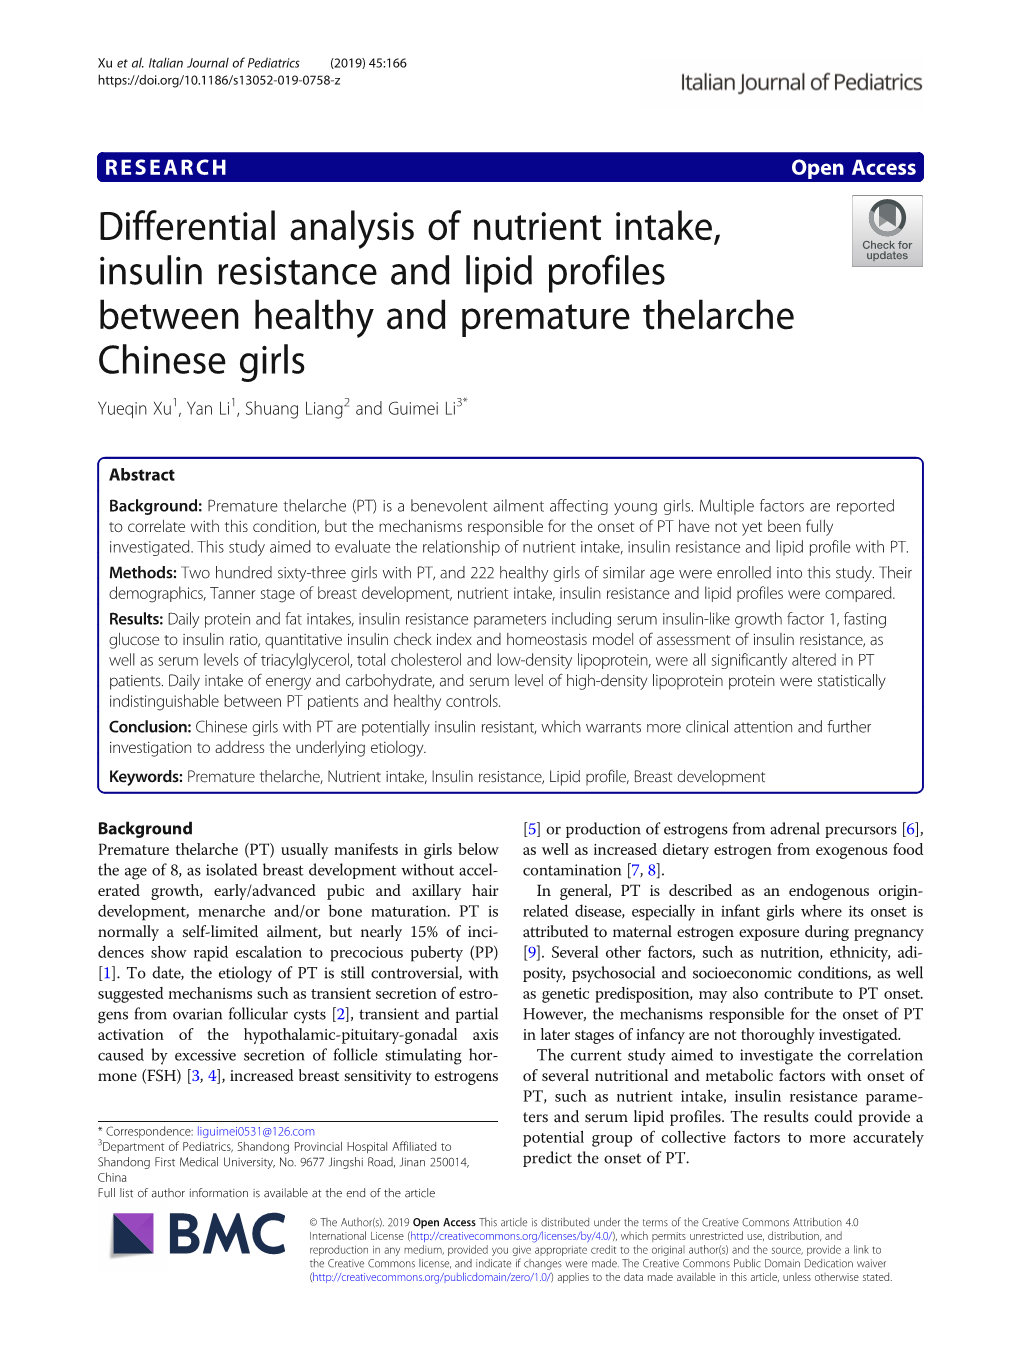 Differential Analysis of Nutrient Intake, Insulin Resistance and Lipid Profiles Between Healthy and Premature Thelarche Chinese